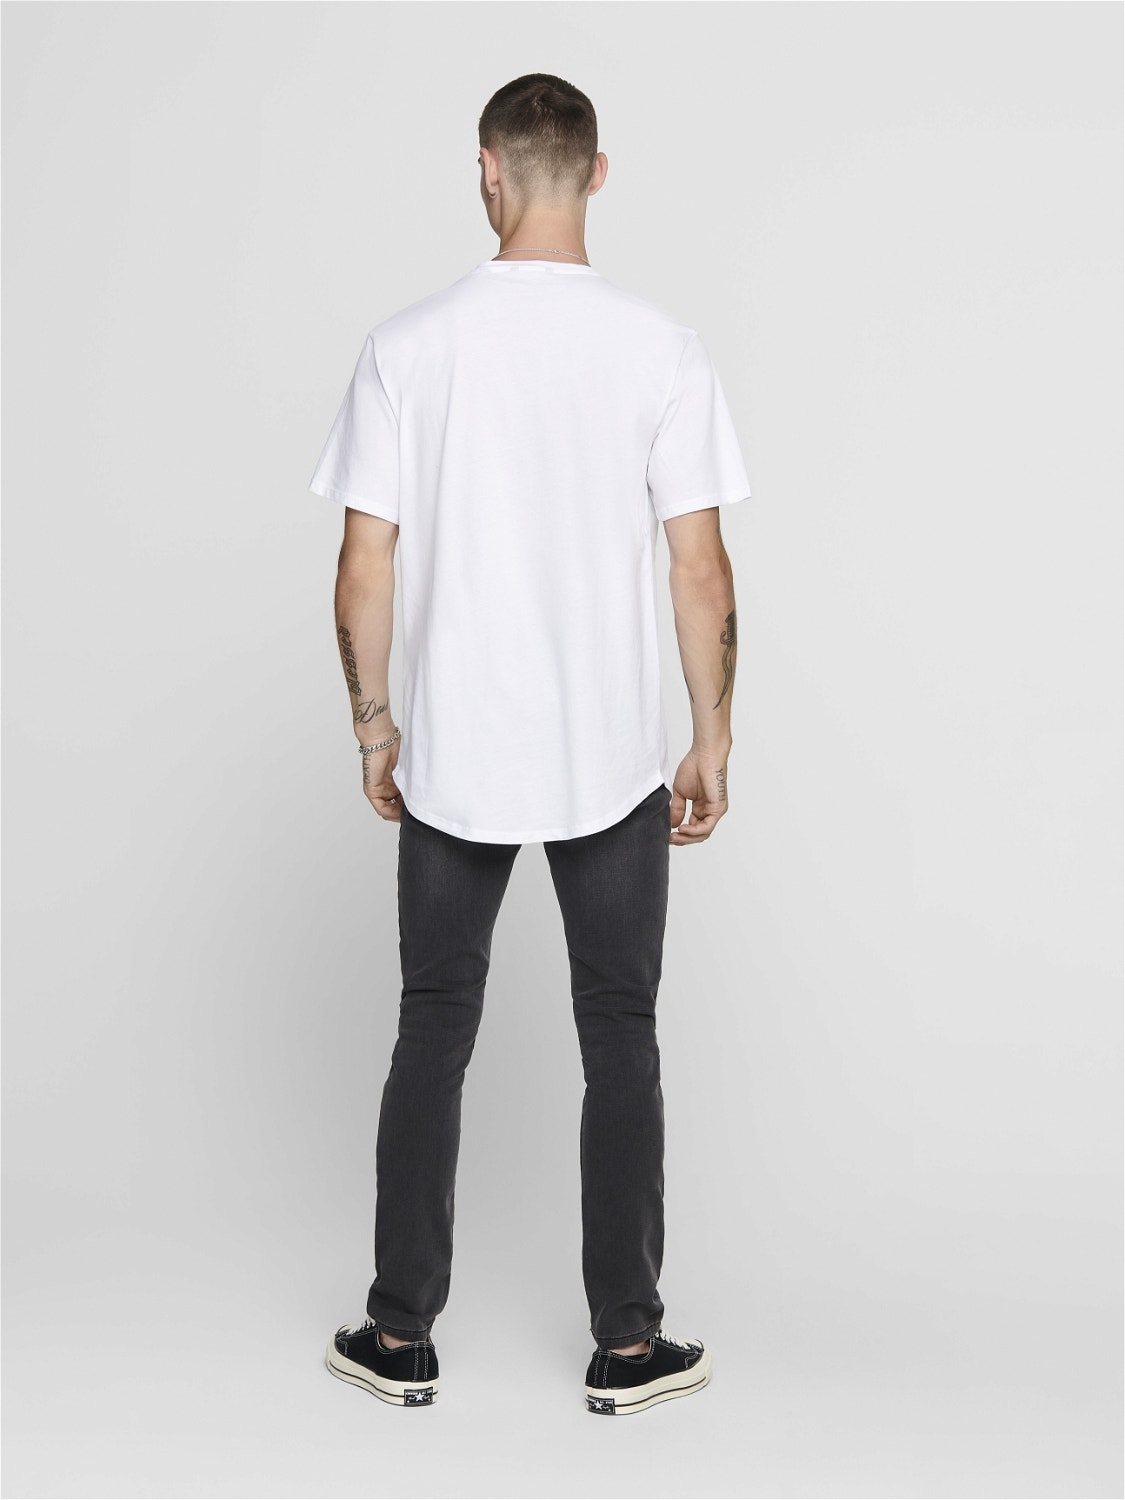 ONLY & SONS Long Line Fit O-hals T-skjorte -White - 22002973